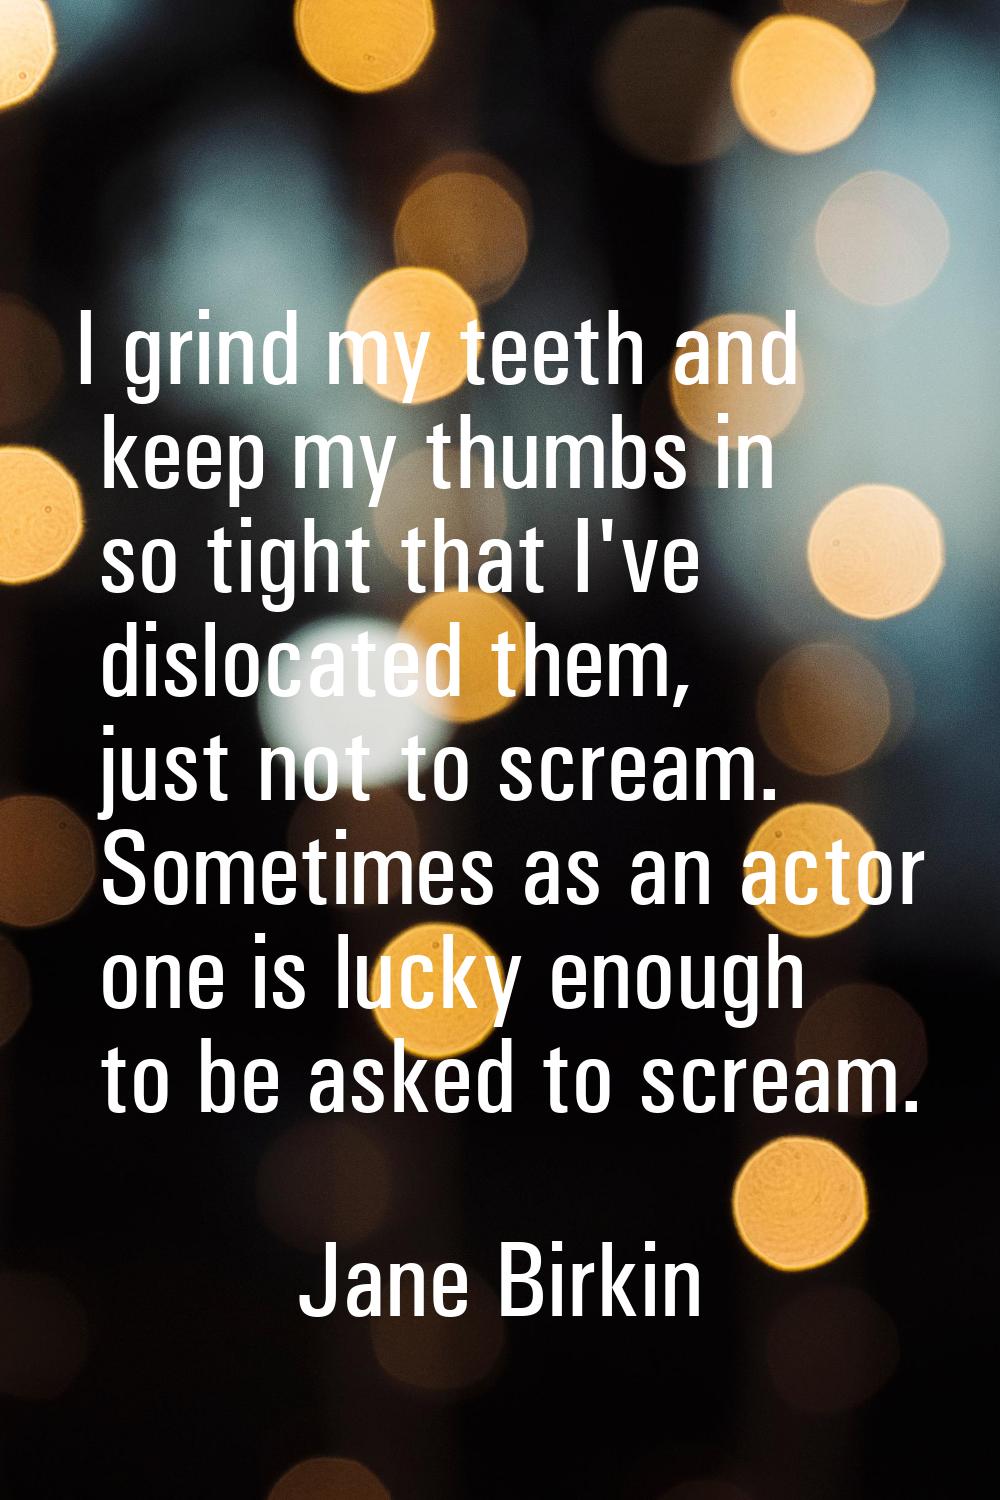 I grind my teeth and keep my thumbs in so tight that I've dislocated them, just not to scream. Some